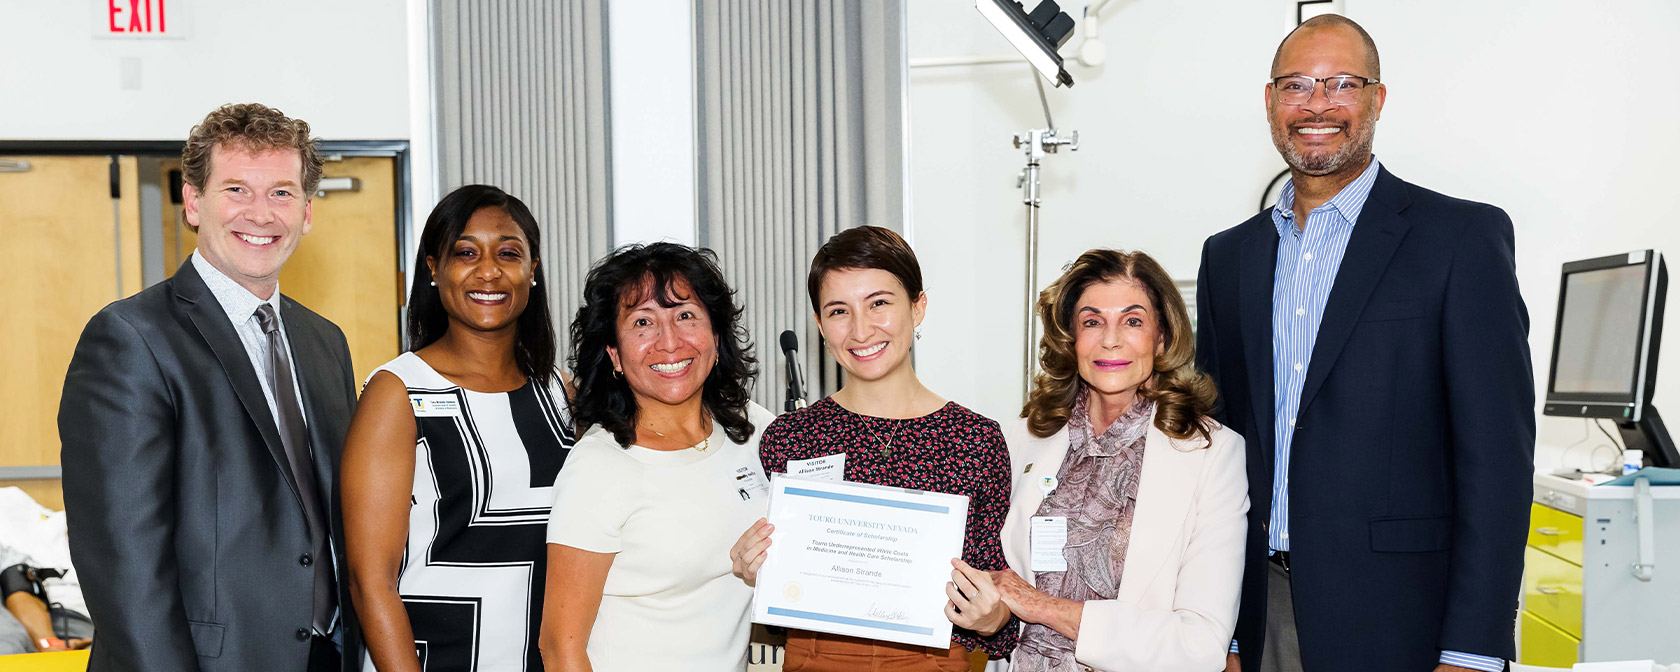 A future Touro student is presented with her certificate of scholarship while the group poses for photo in the Michael Tang Regional Center for Clinical Simulation.